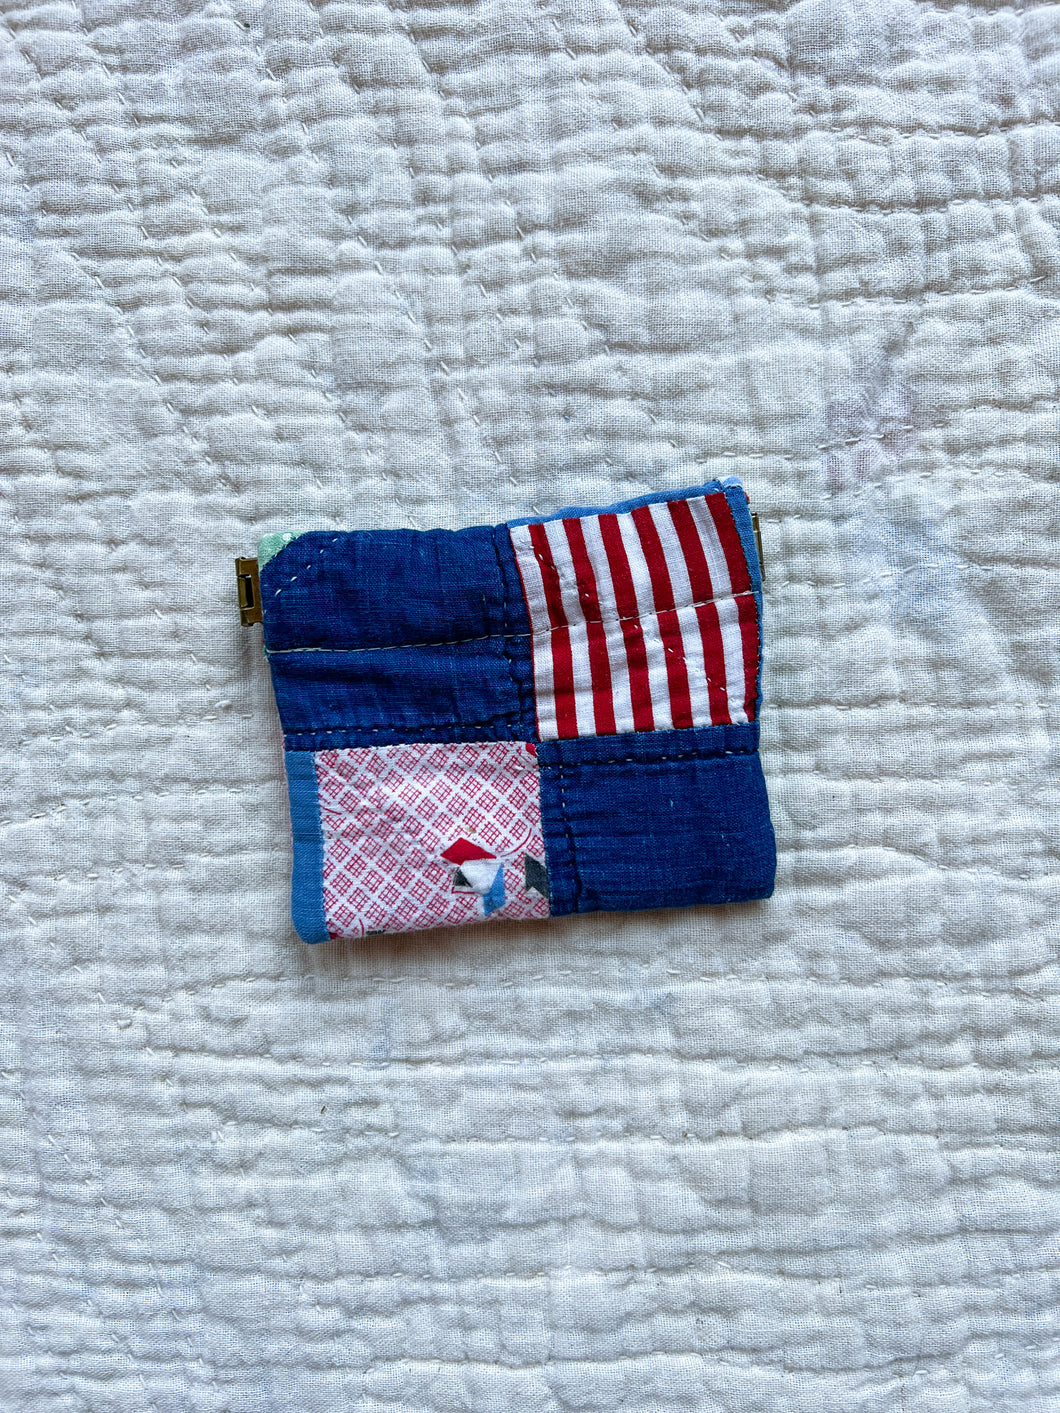 One-of-a-Kind: Jacob's Ladder Pinch Pocket